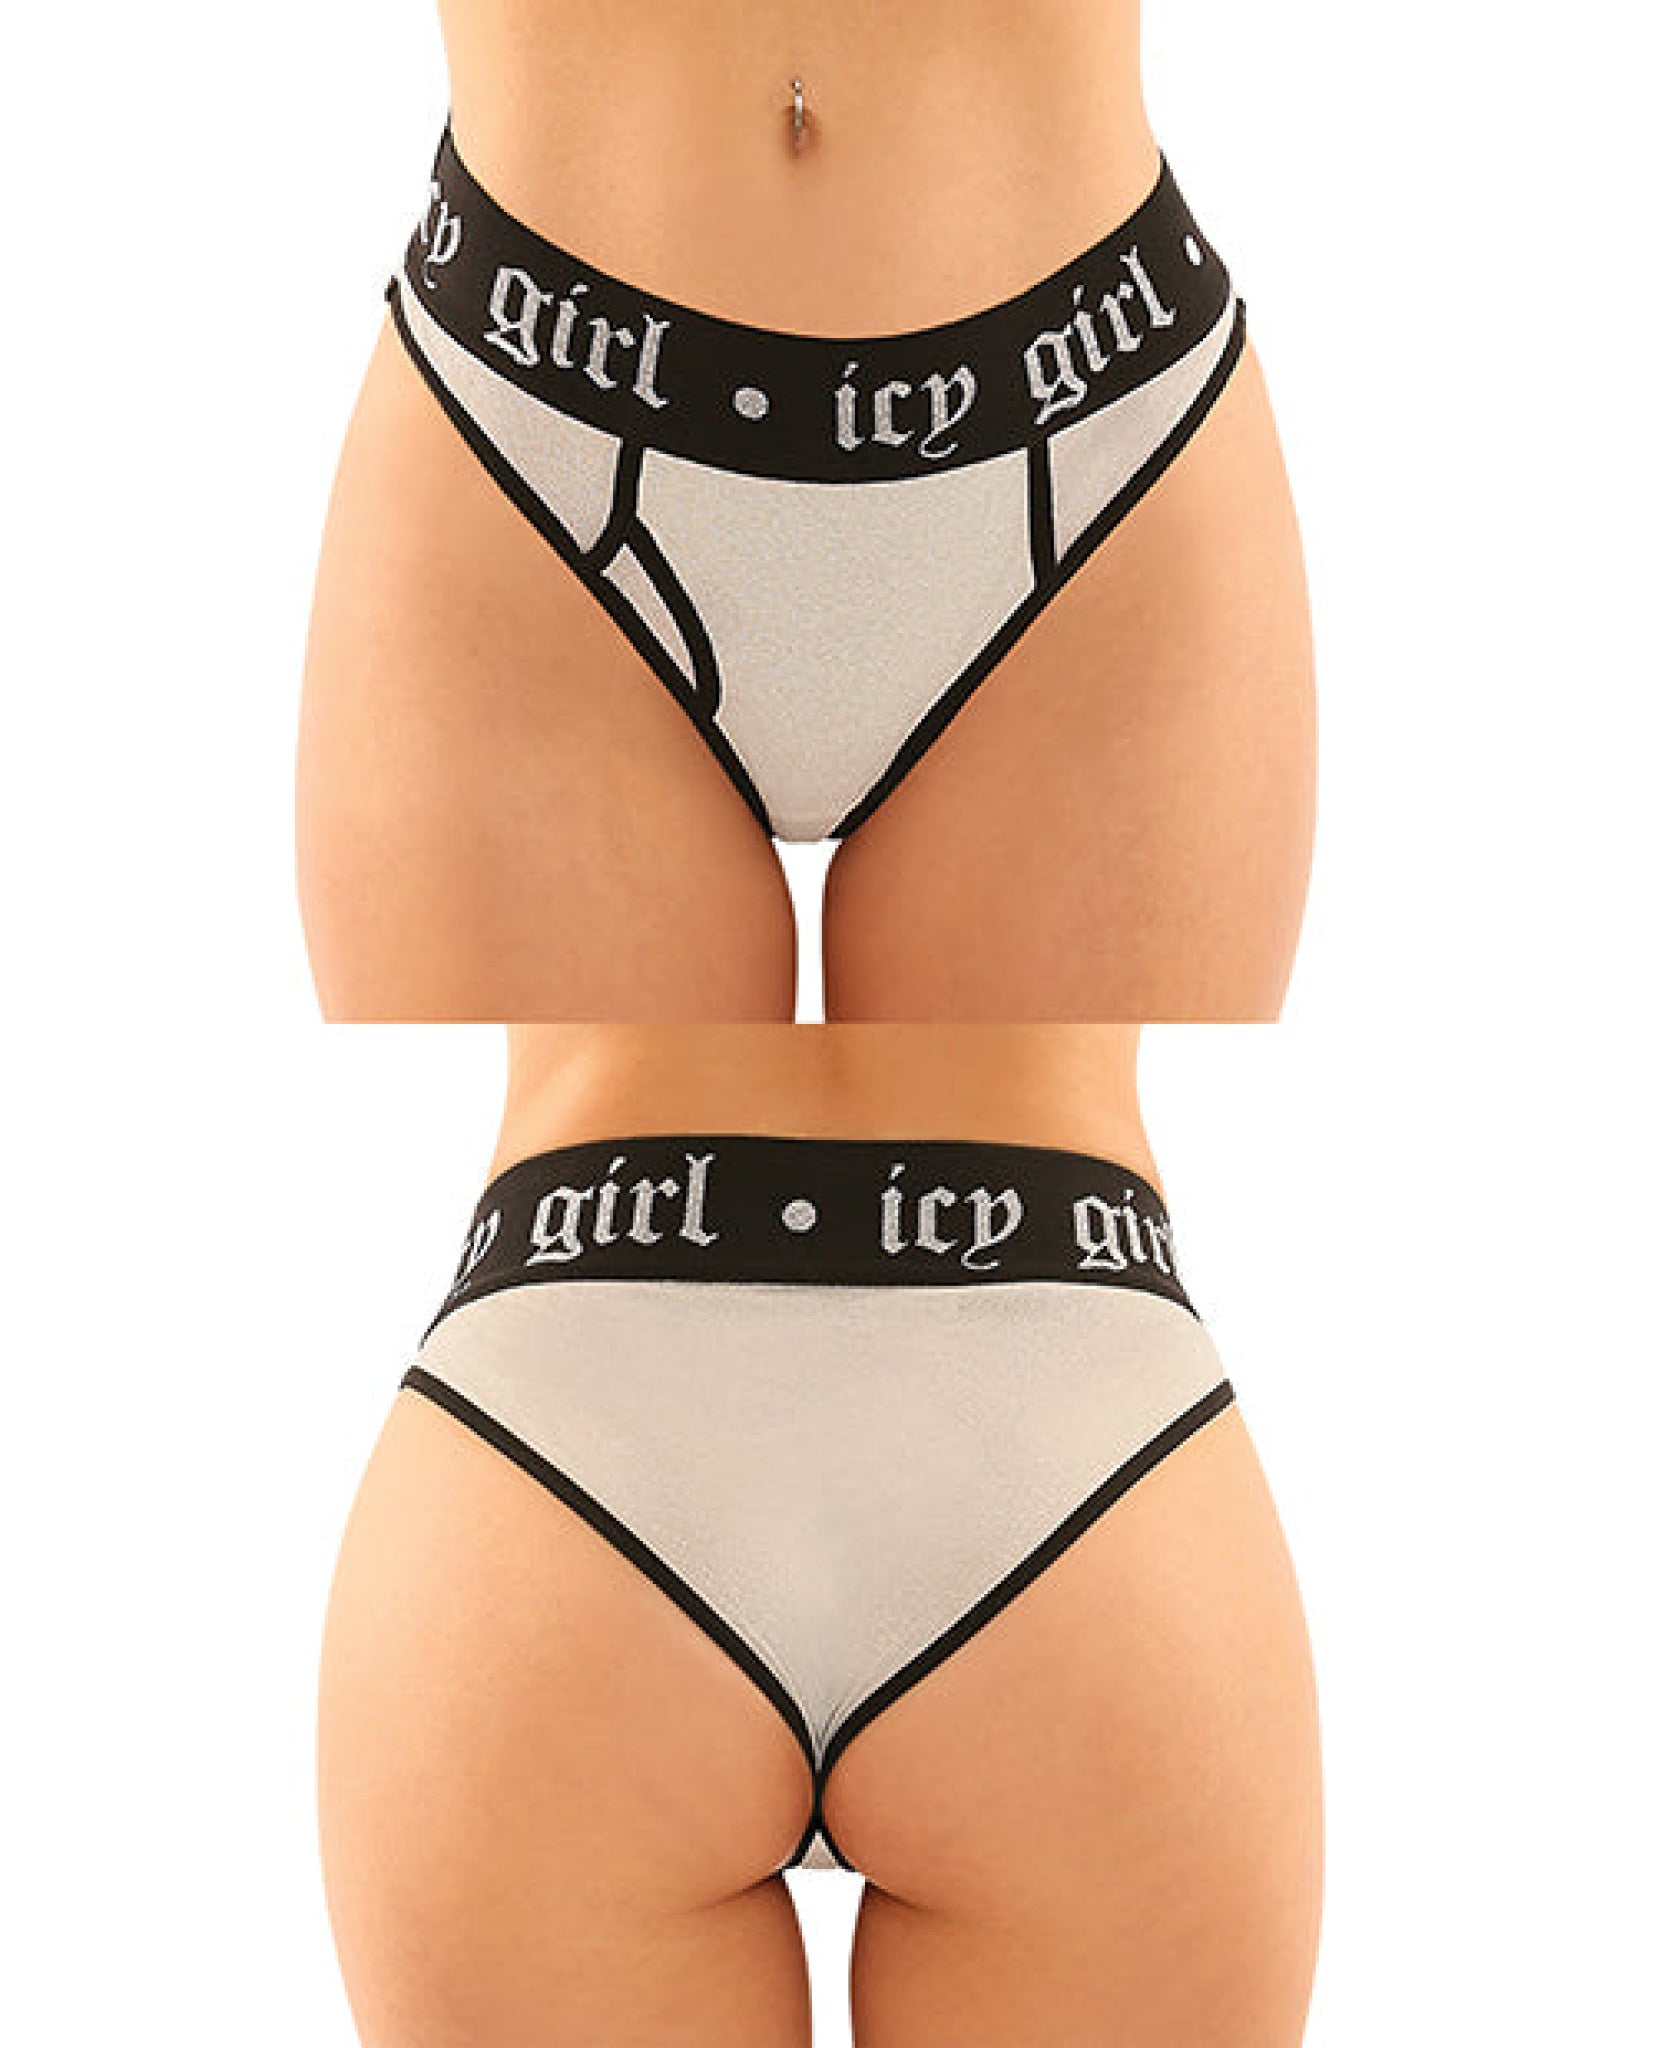 Vibes Buddy Pack Icy Girl Metallic Boy Brief & Lace Thong Black Fantasy Lingerie